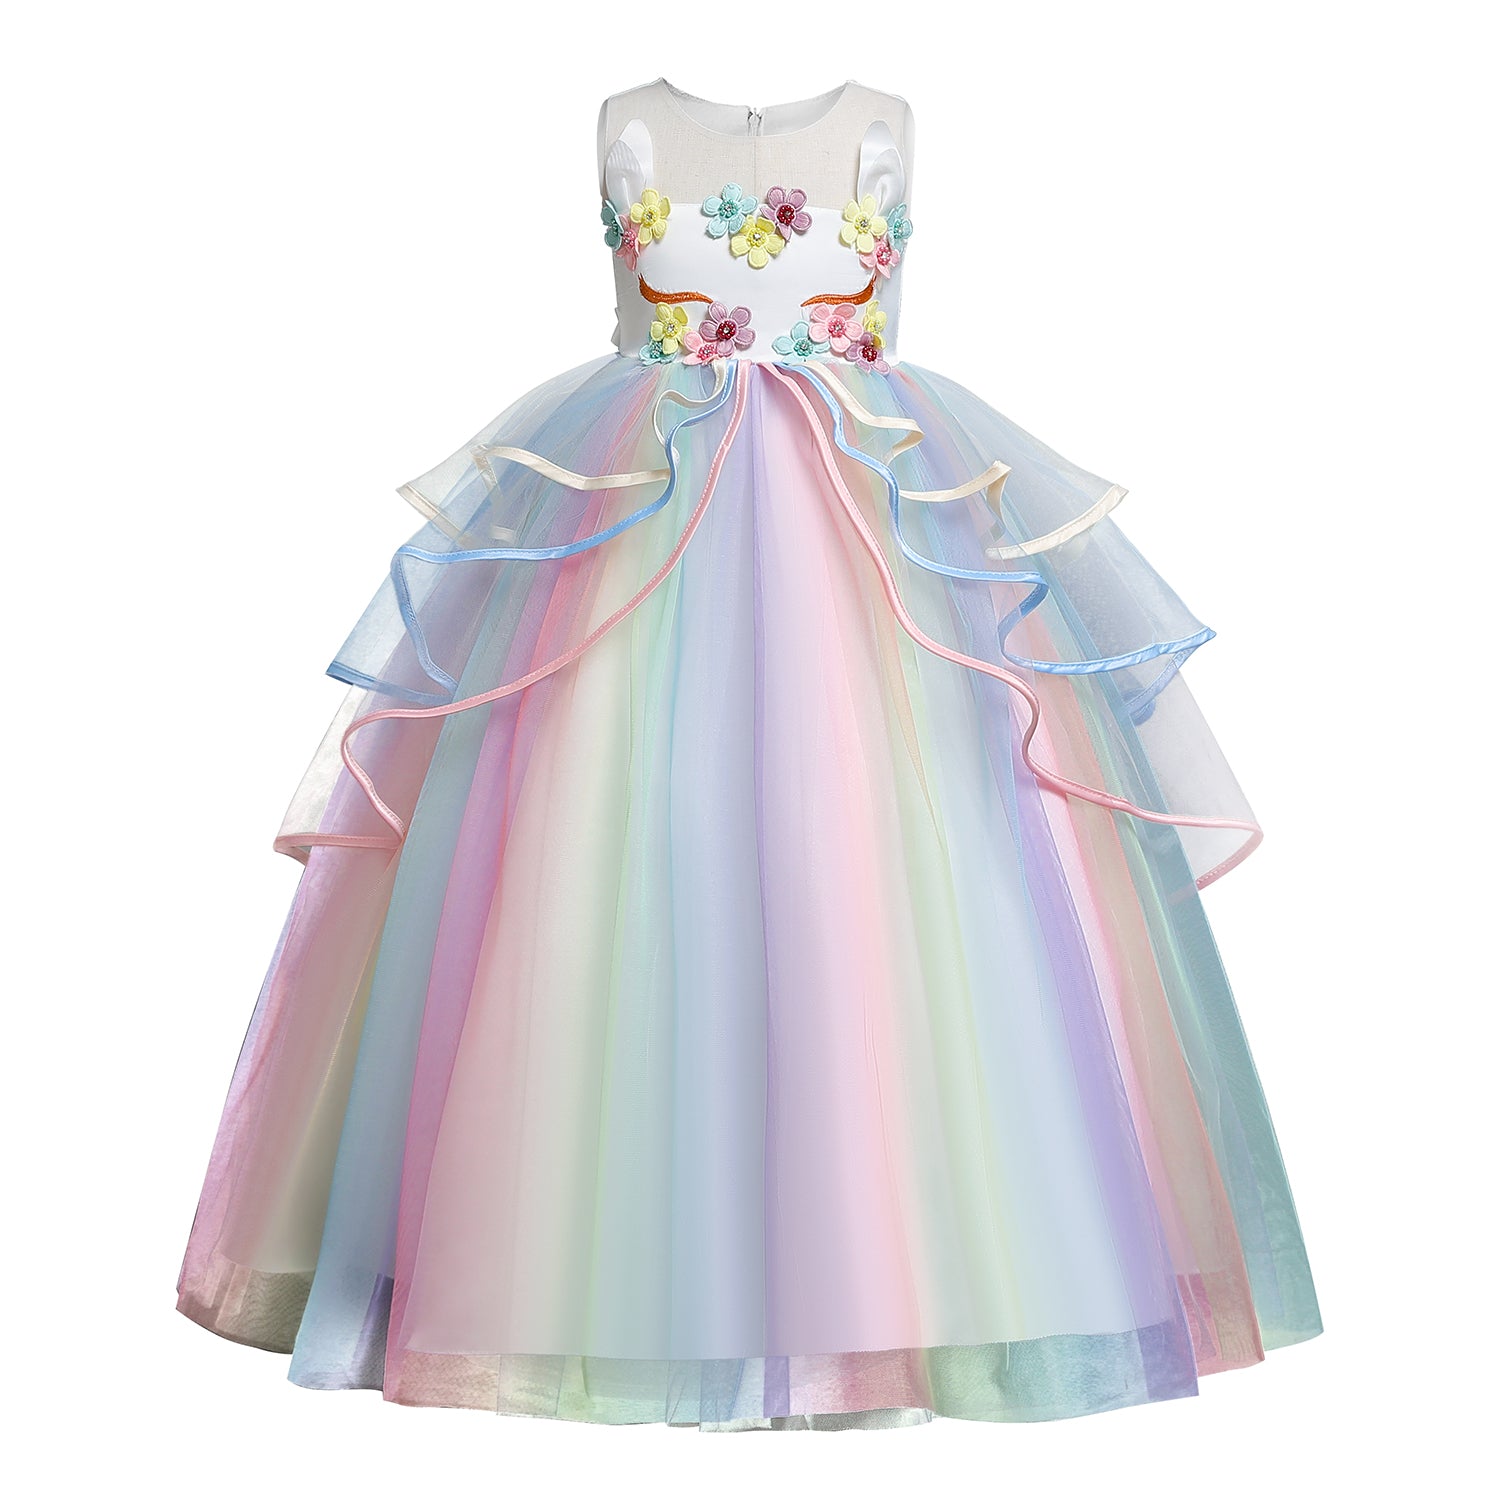 New Unicorn Girls Costume Cosplay Fancy Ball Gown Princess Tulle Dresses For Holiday Party Dance.